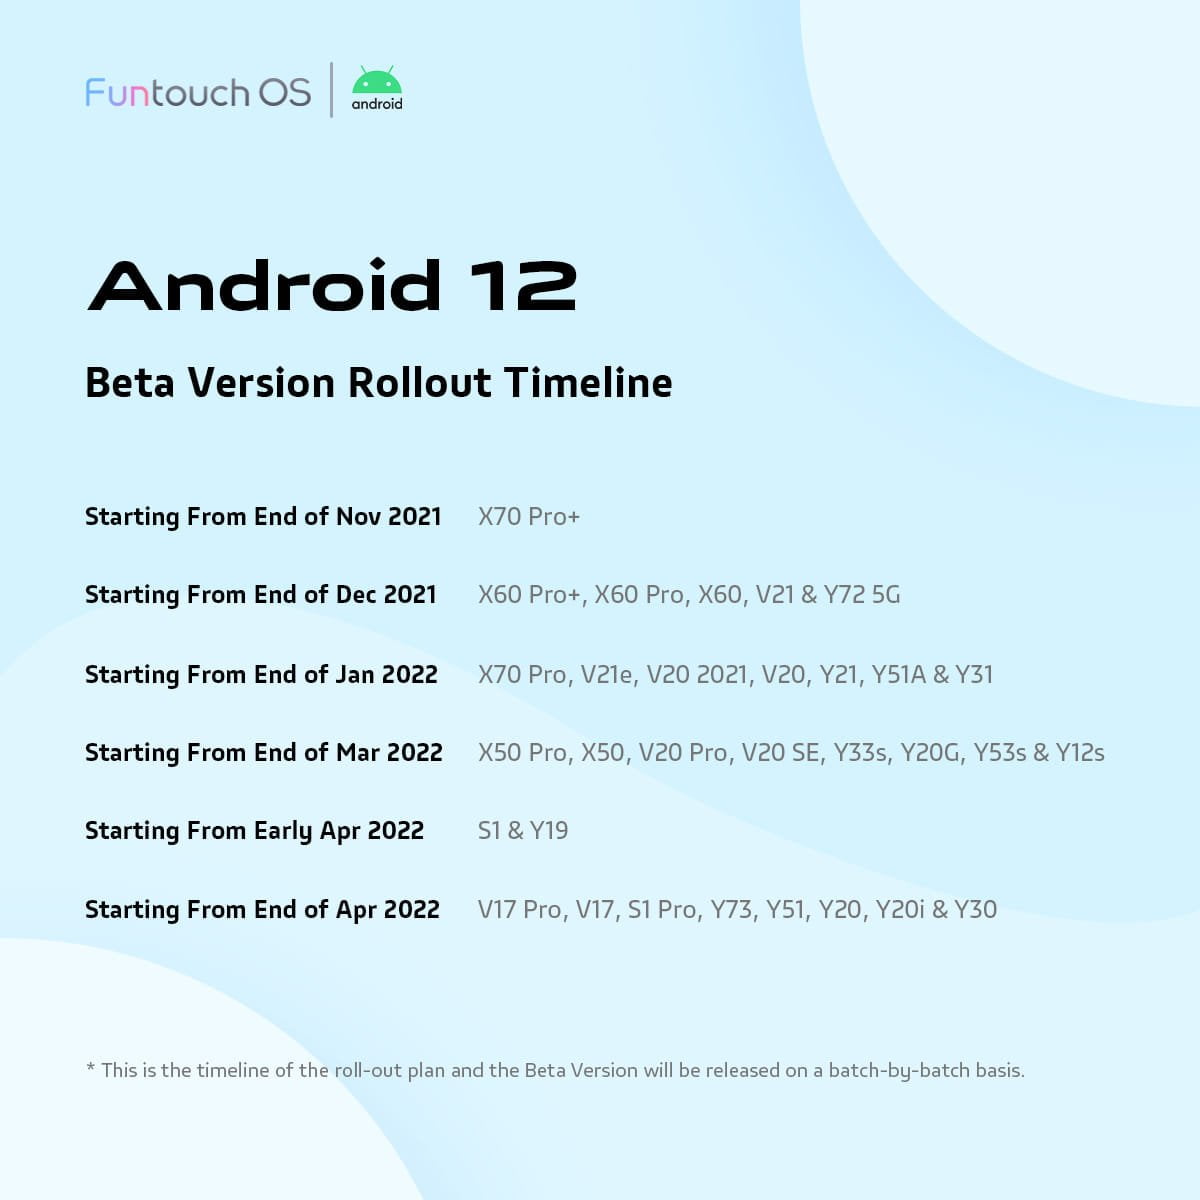 Vivo's Android 12 Beta Rollout Plan